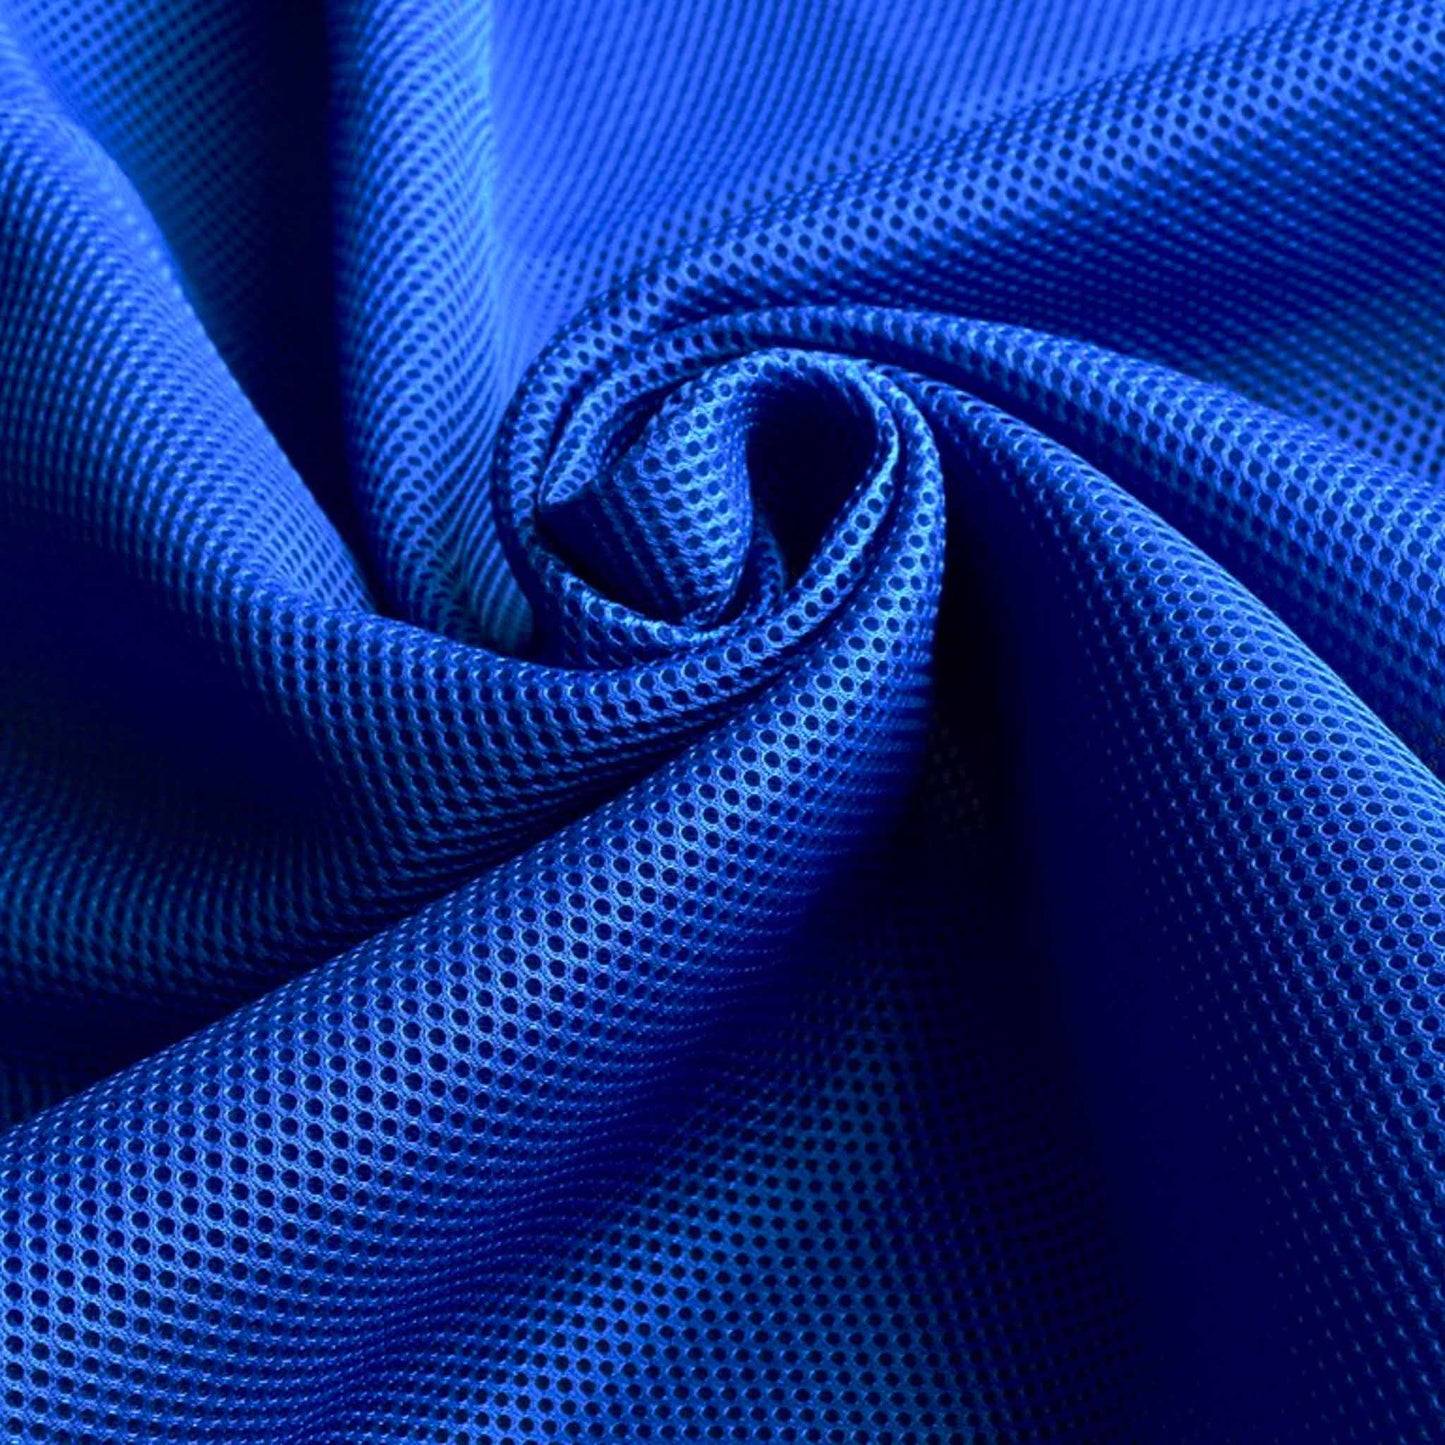 blue airtex spacer mesh sports fabric for activity wear